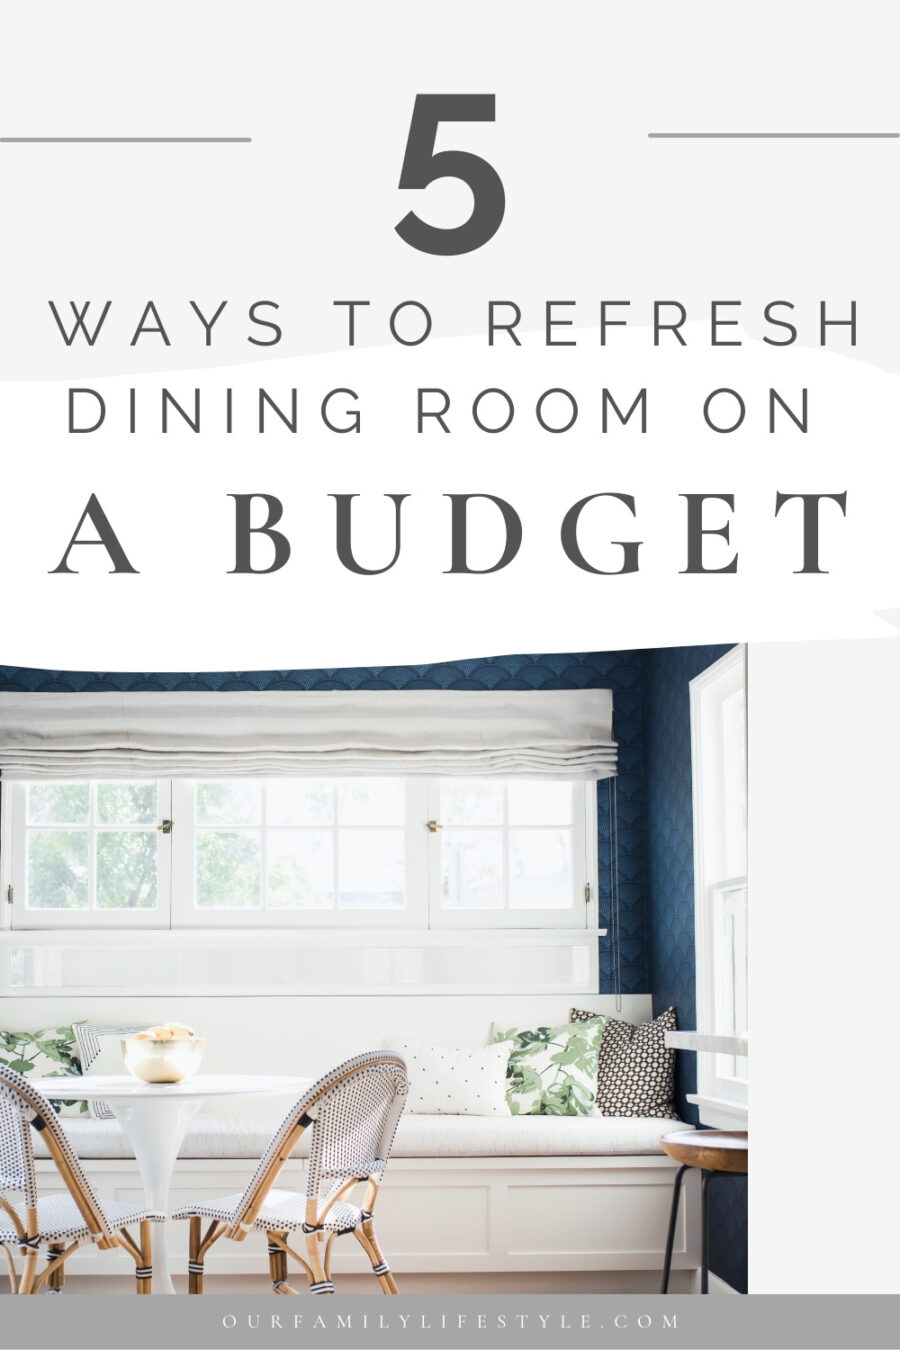 How to Refresh Your Dining Room on a Budget